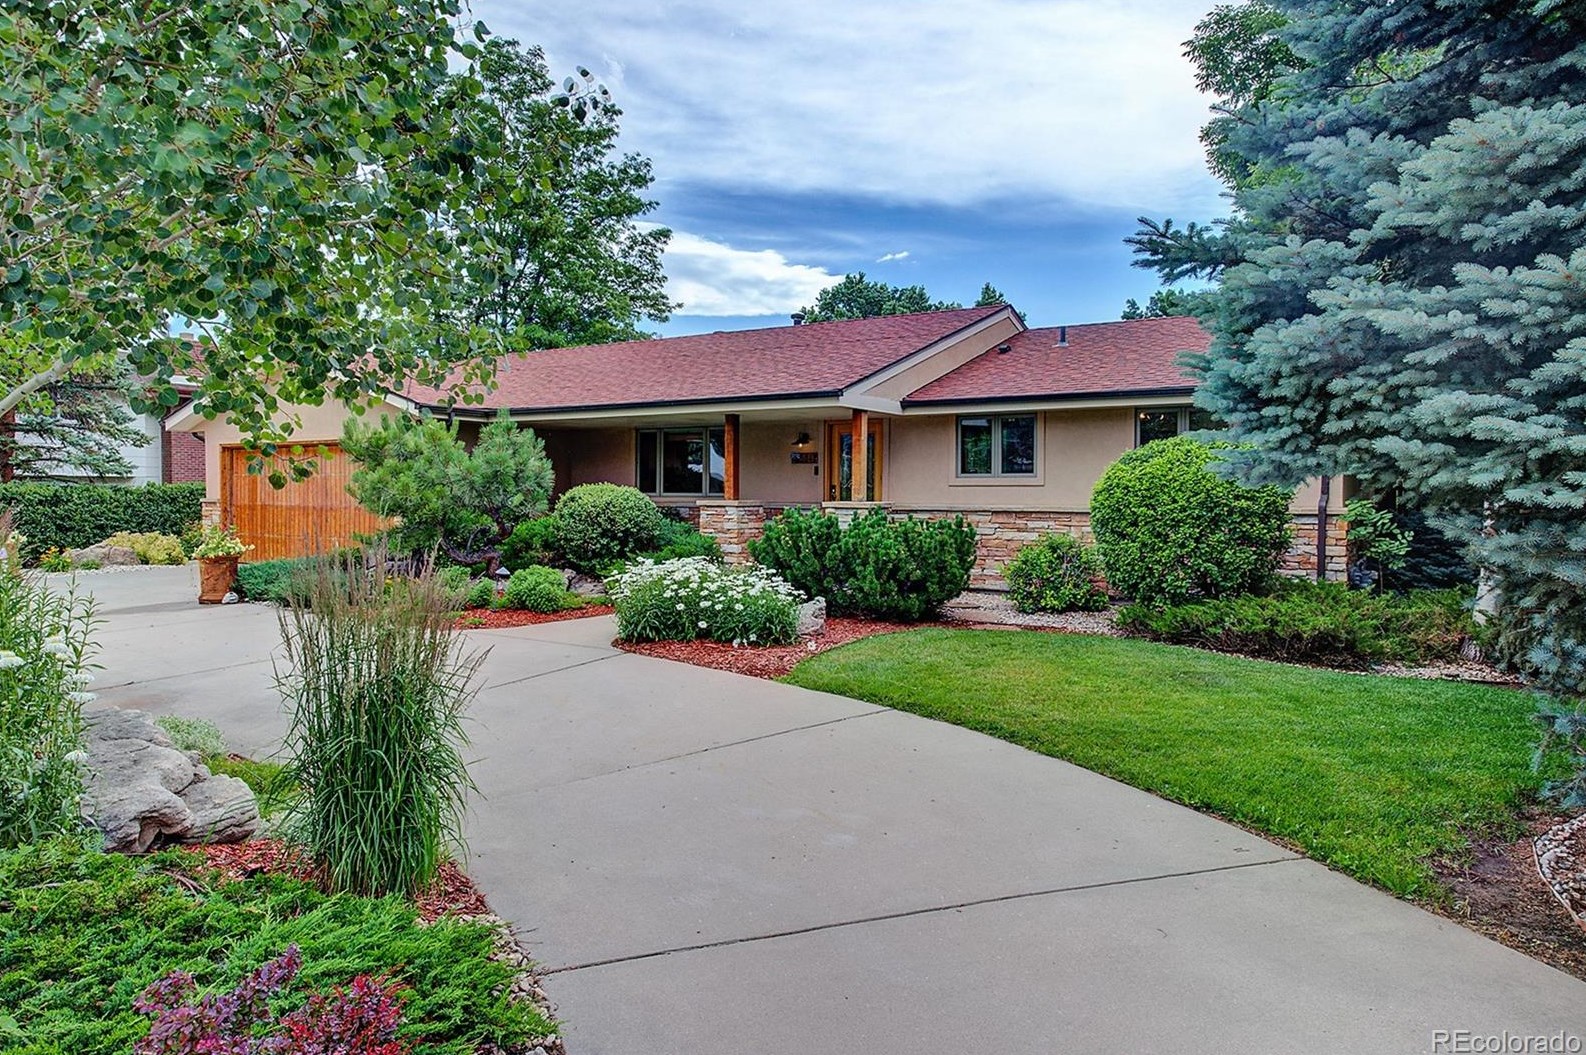 5242 Howell St, Arvada, CO 80002-1522